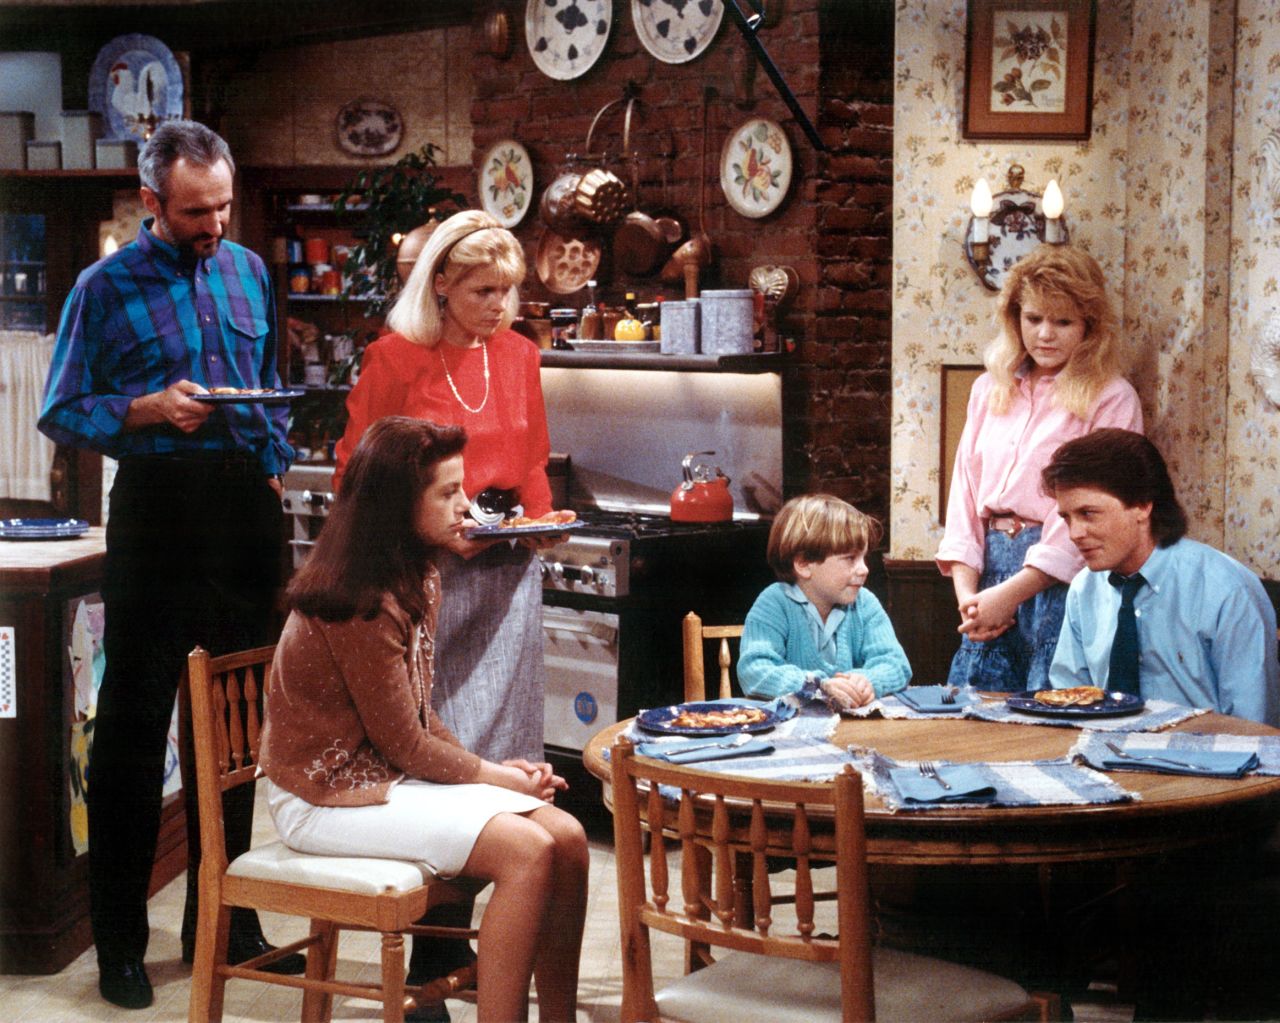 In "Family Ties," Elyse Keaton (Meredith Baxter, second from left) juggled life as an architect with a mother's sturdy guidance for her children (from left, Justine Bateman, Brian Bonsall, Tina Yothers and Michael J. Fox). Husband Steven (Michael Gross, far left) was an equal partner. 